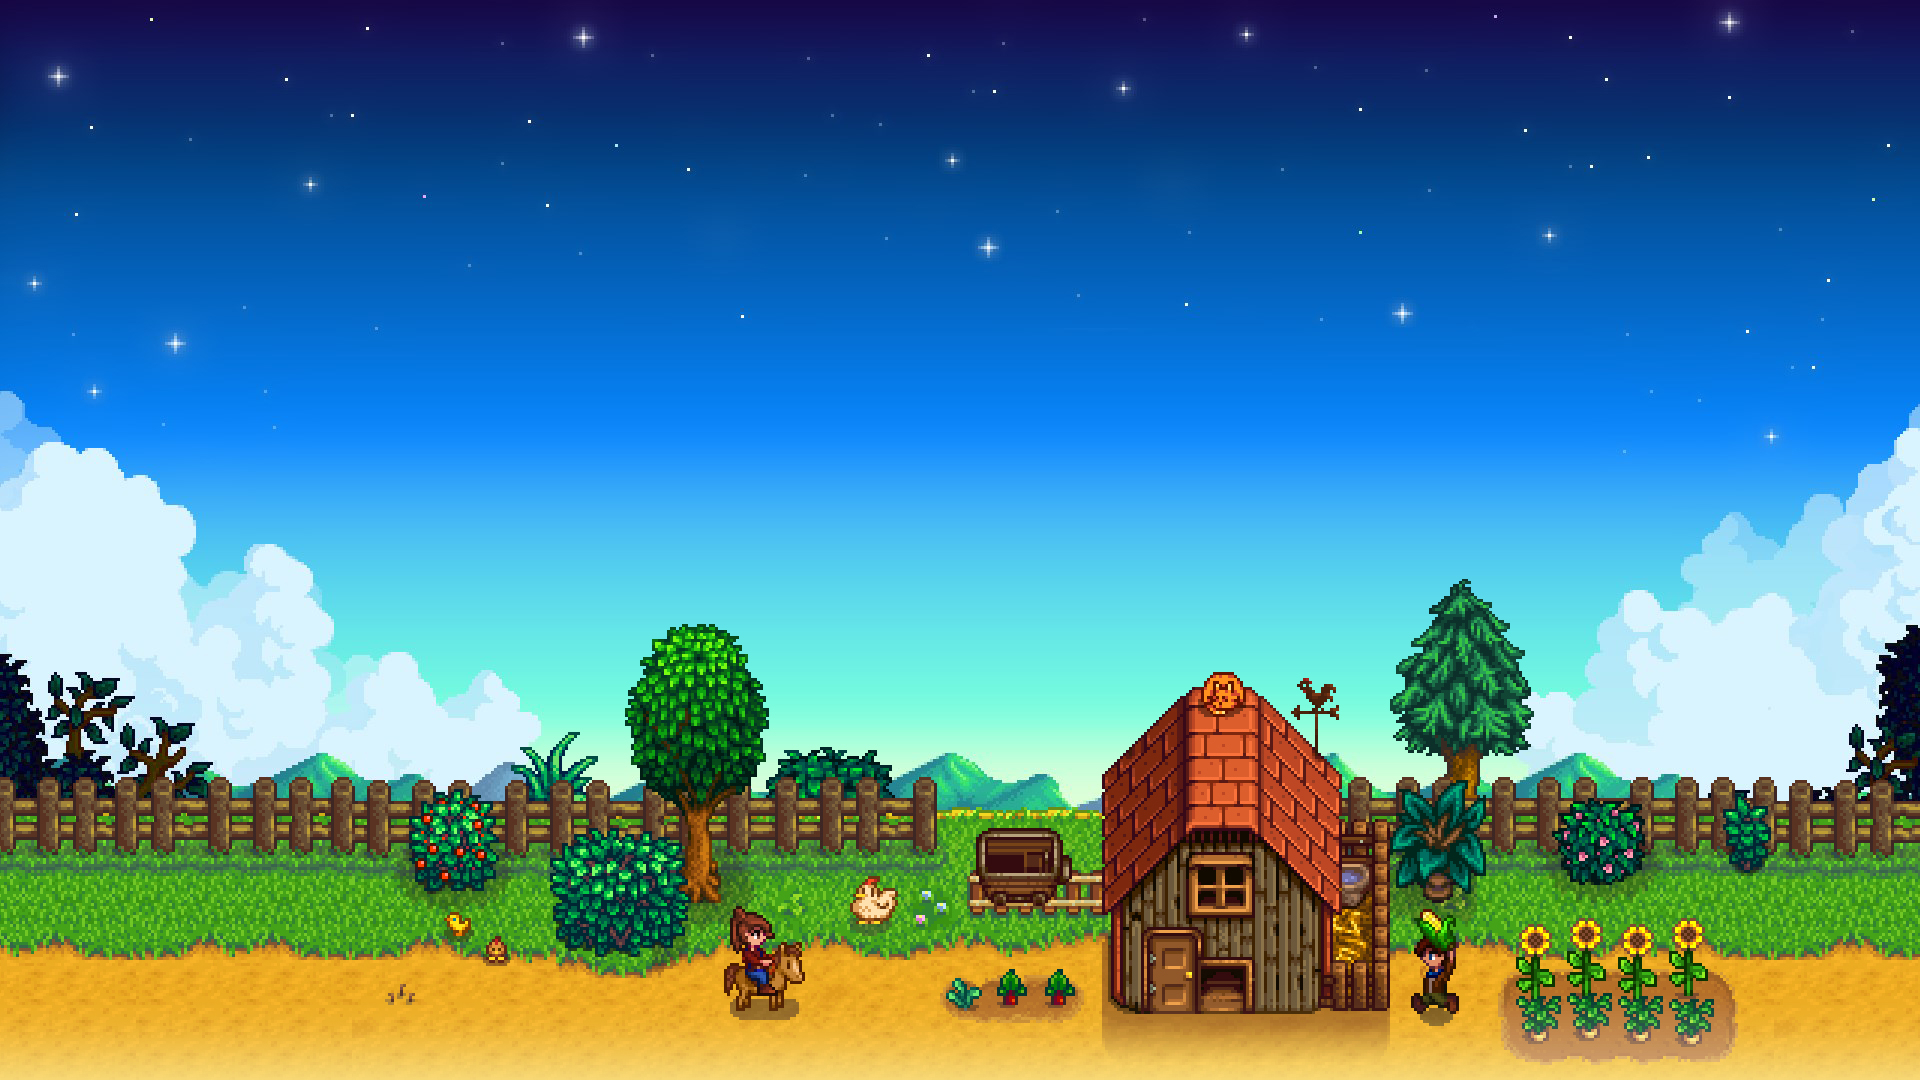 Stardew Valley mod lets NPCs come visit you, just like Animal Crossing